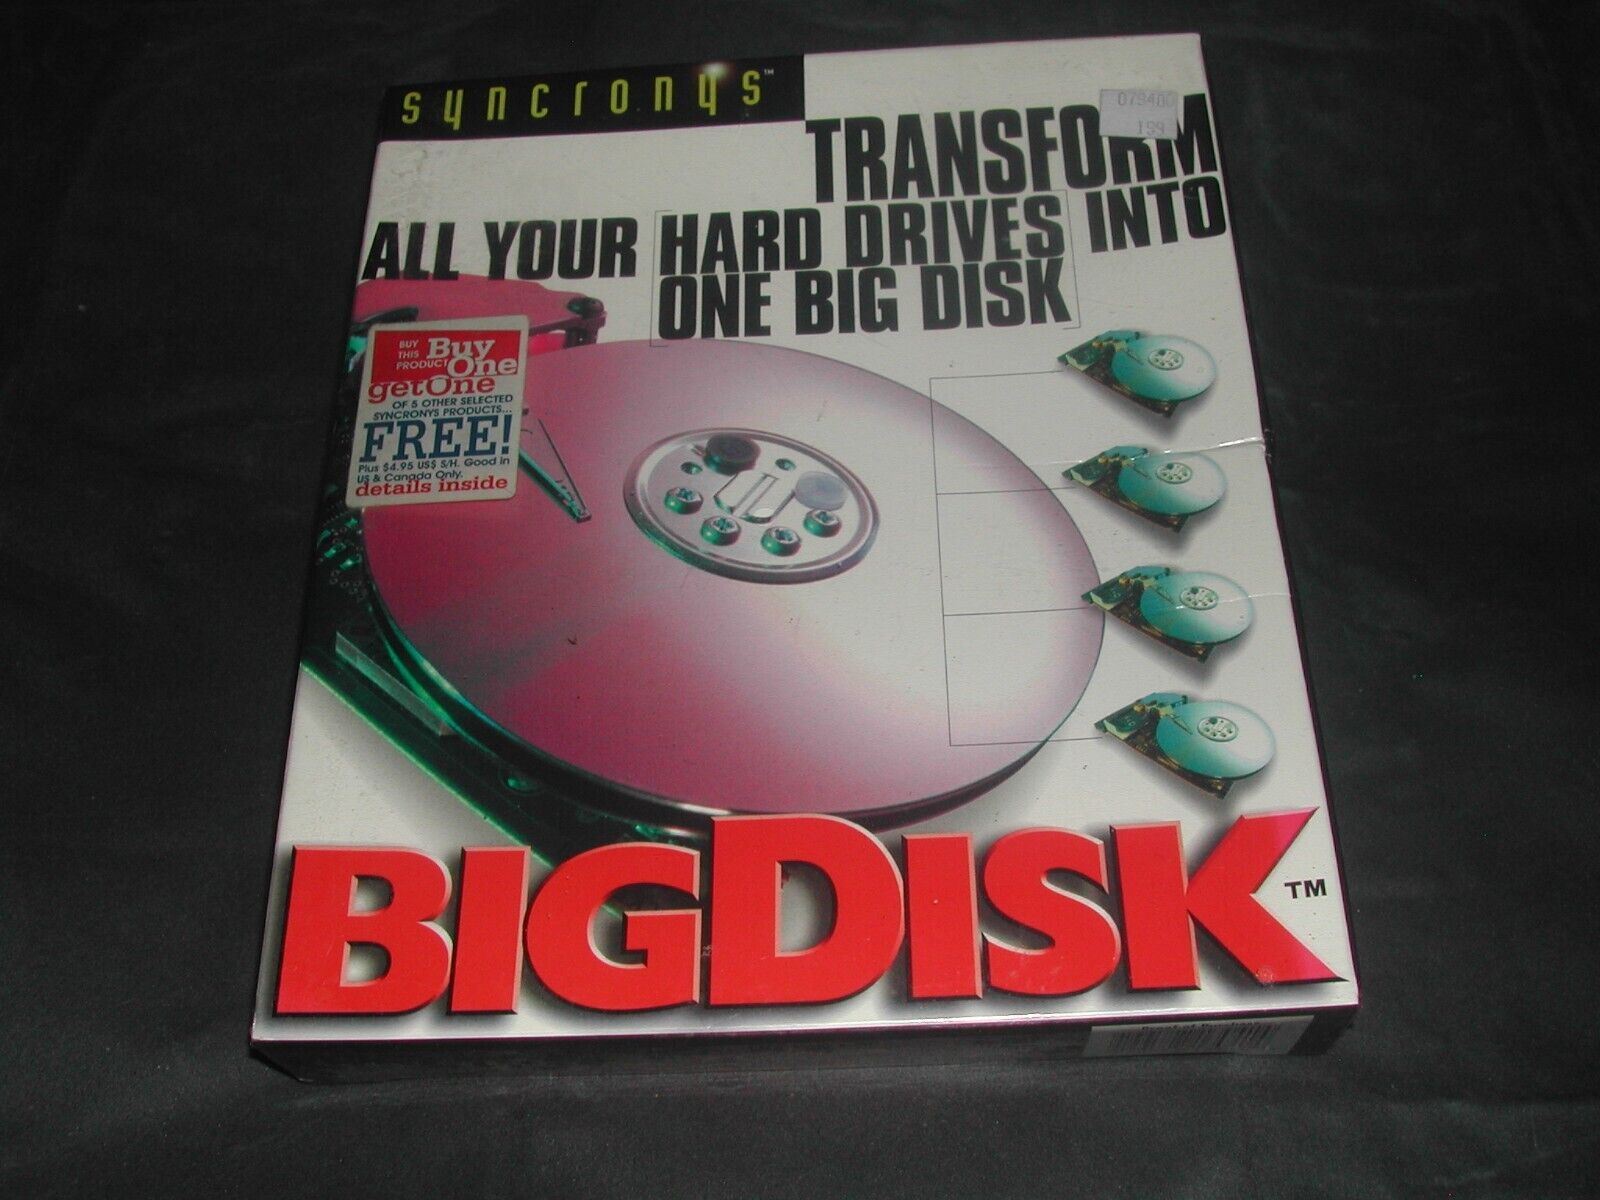 Vtg Syncronys Big Disk Transform All Your Hard Drives To One Big Disk Sealed NOS